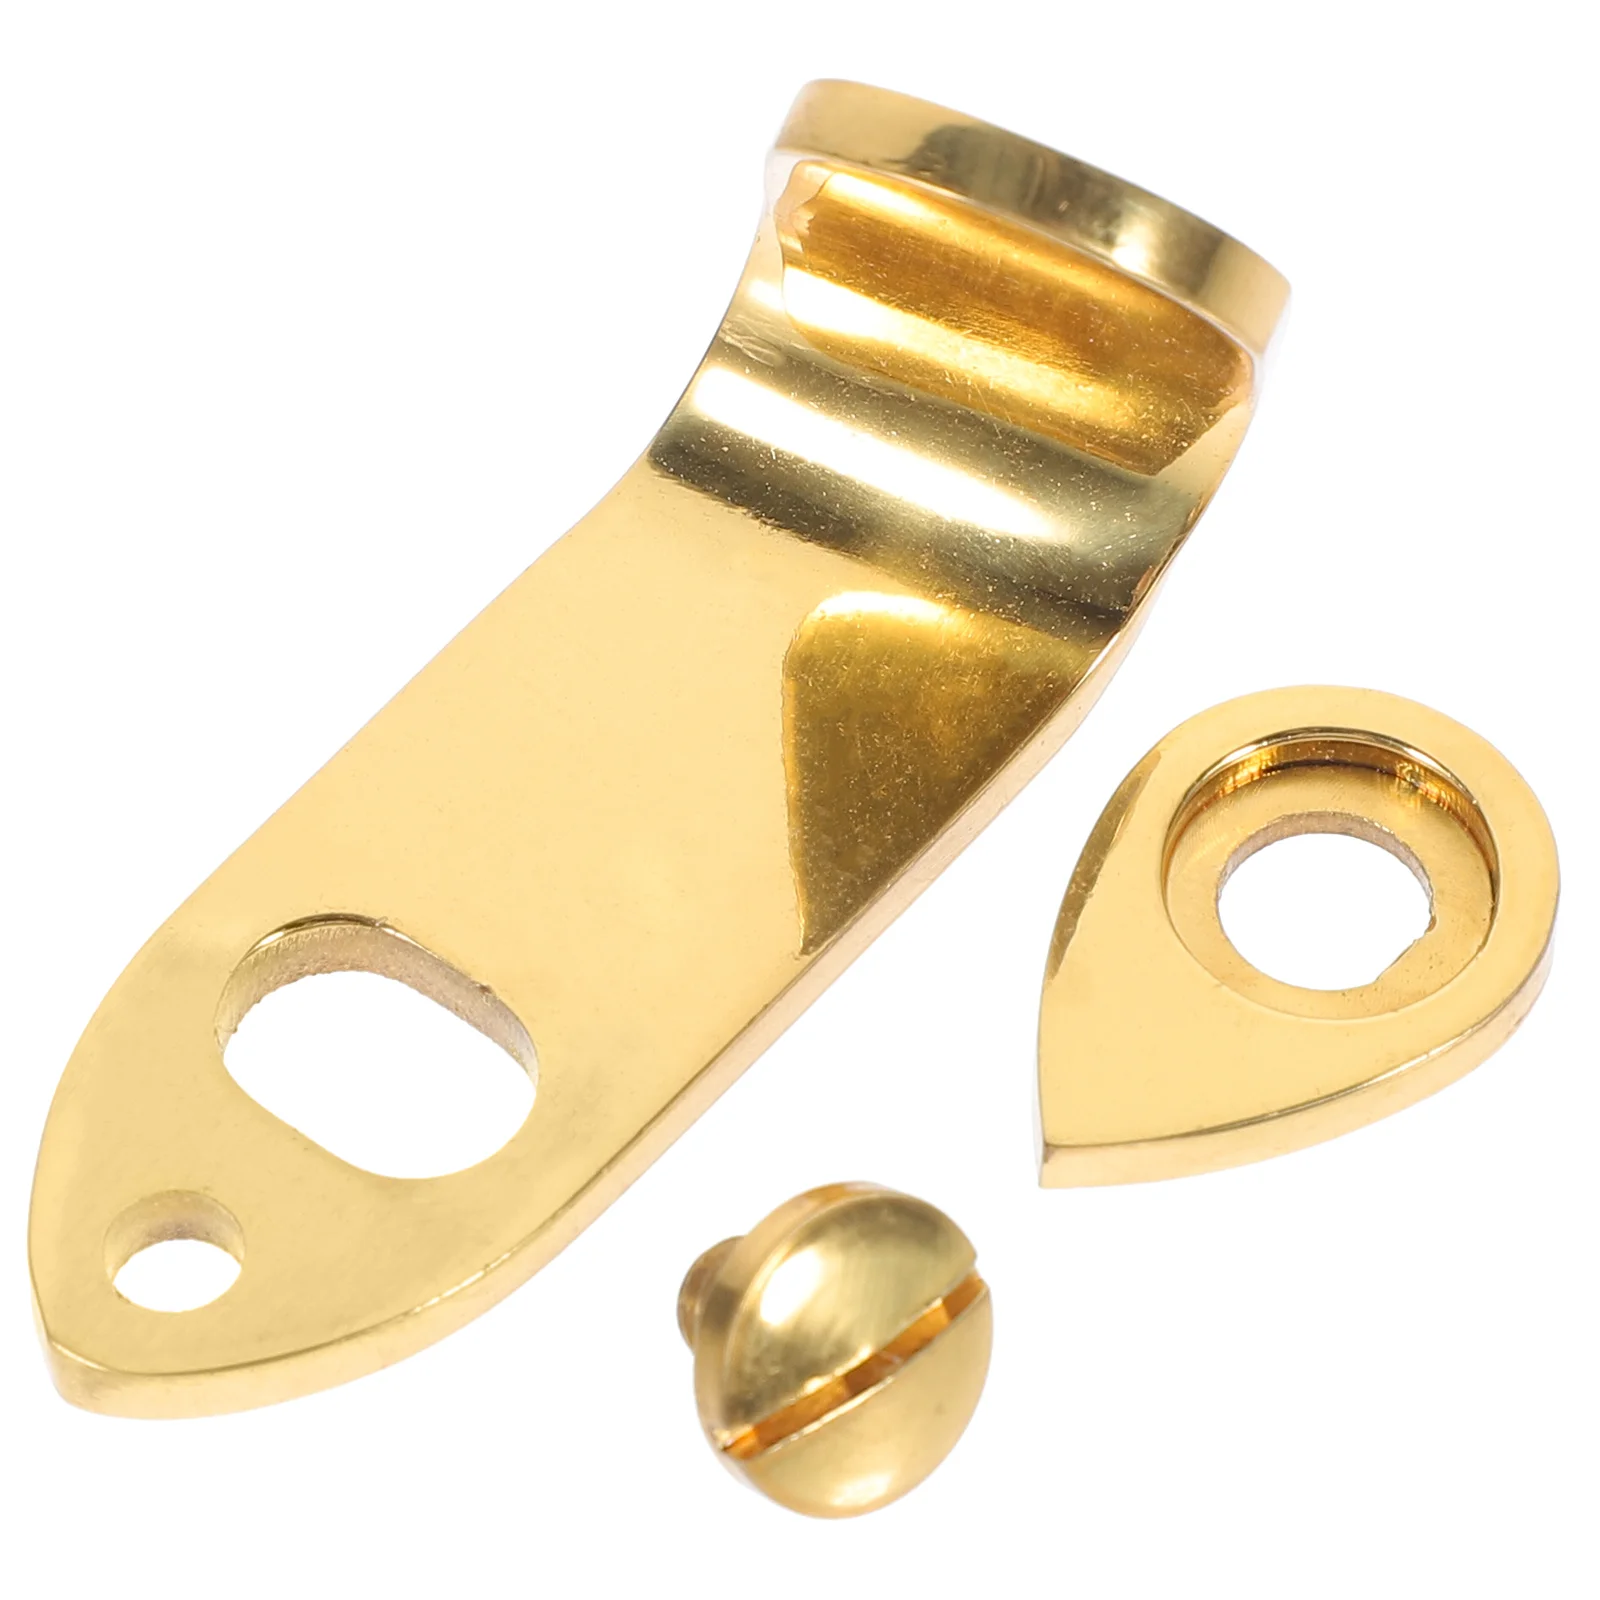 

Clarinet Saxophone Cushion Finger Rest Thumb Support Metal Tenor Wood Instrument Alto Replacement